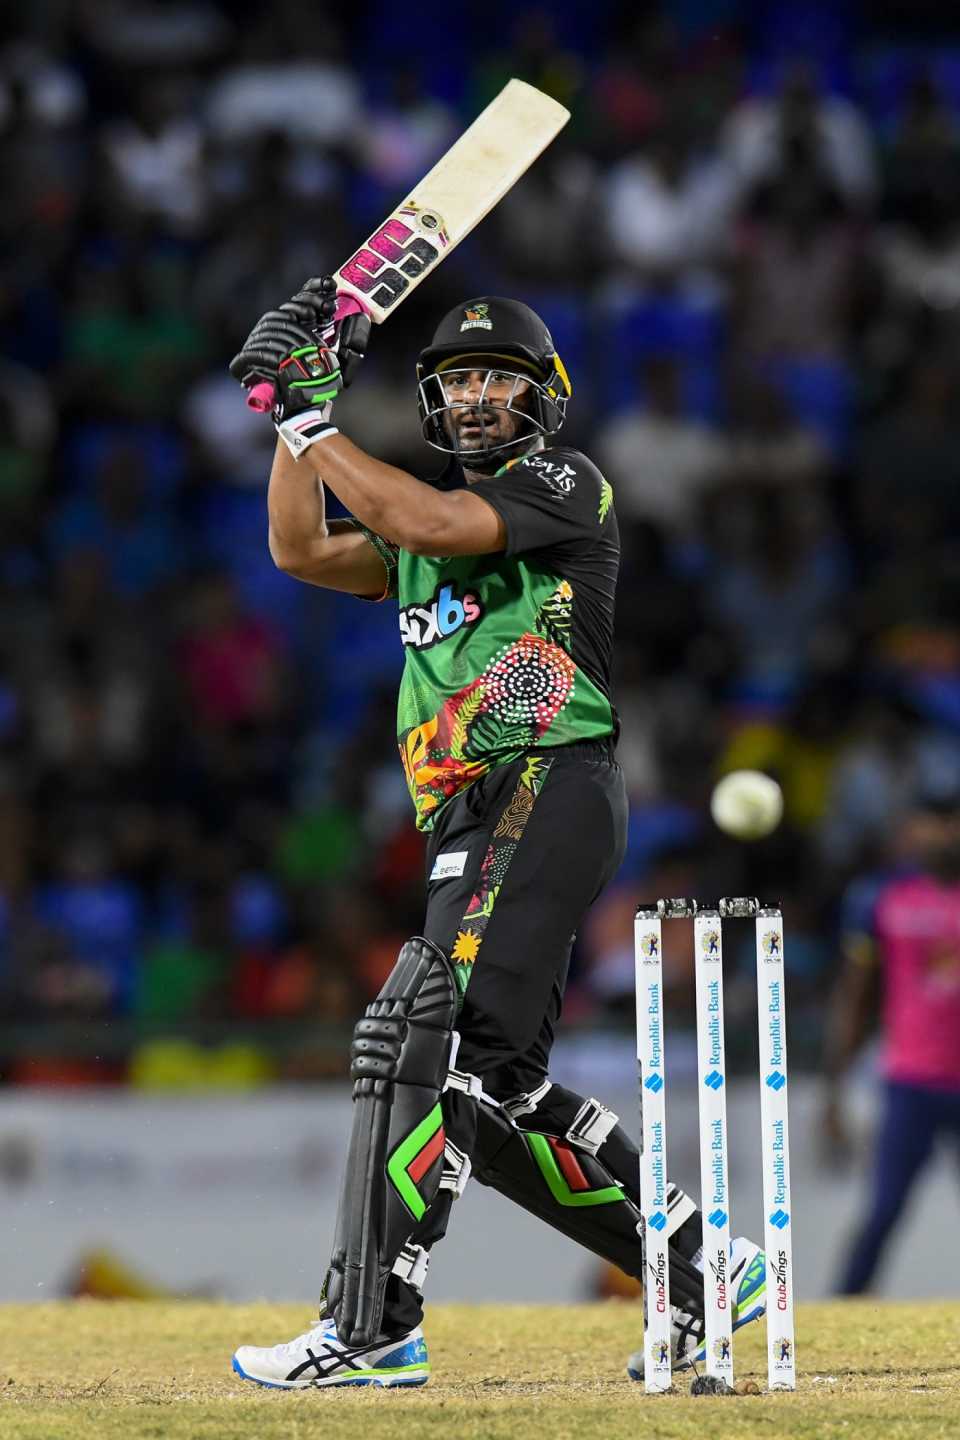 Ambati Rayudu could only manage 46 runs in three innings at the CPL